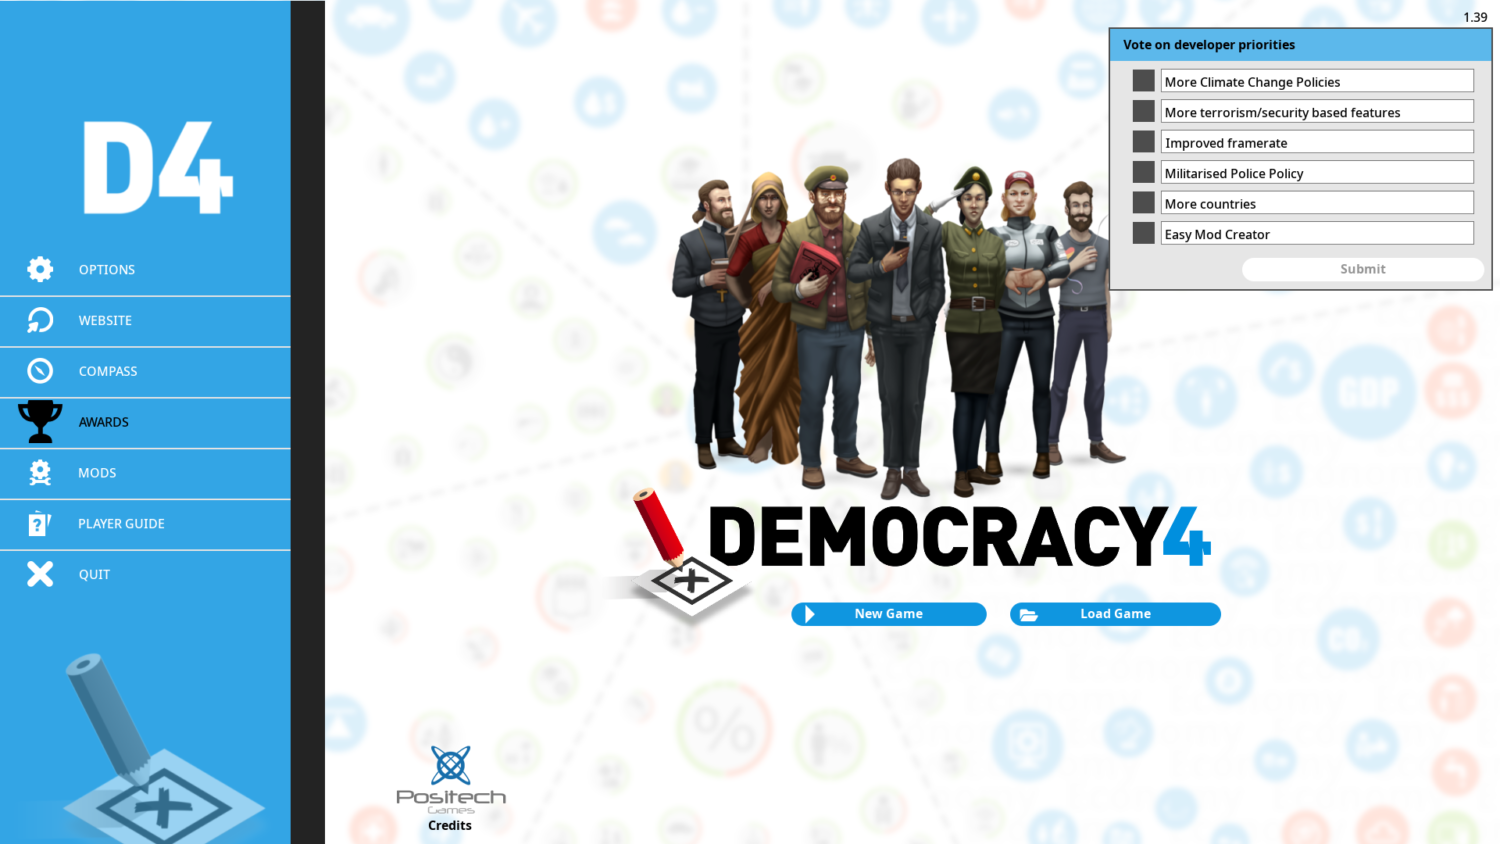 It is literally 1984 in ‘Democracy 4’